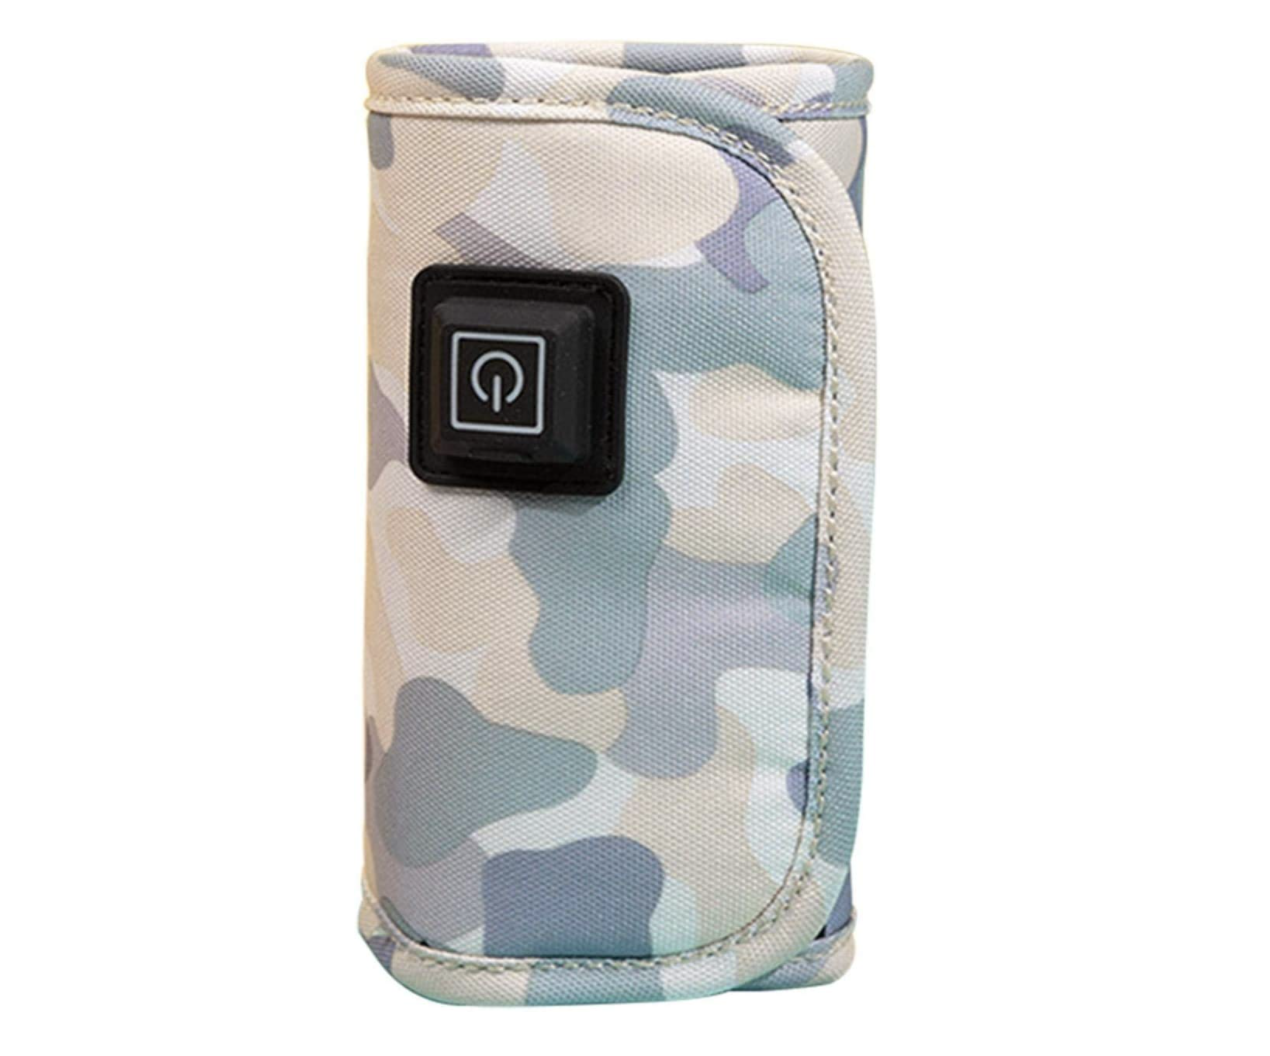 Travel Portable Car Travel Insulated Bag for Breast Milk Adjustable Temperature Camouflage Black KASCLINO USB Baby Bottle Warmer Keep Baby Milk Warm for Indoor and Outdoor Shopping 